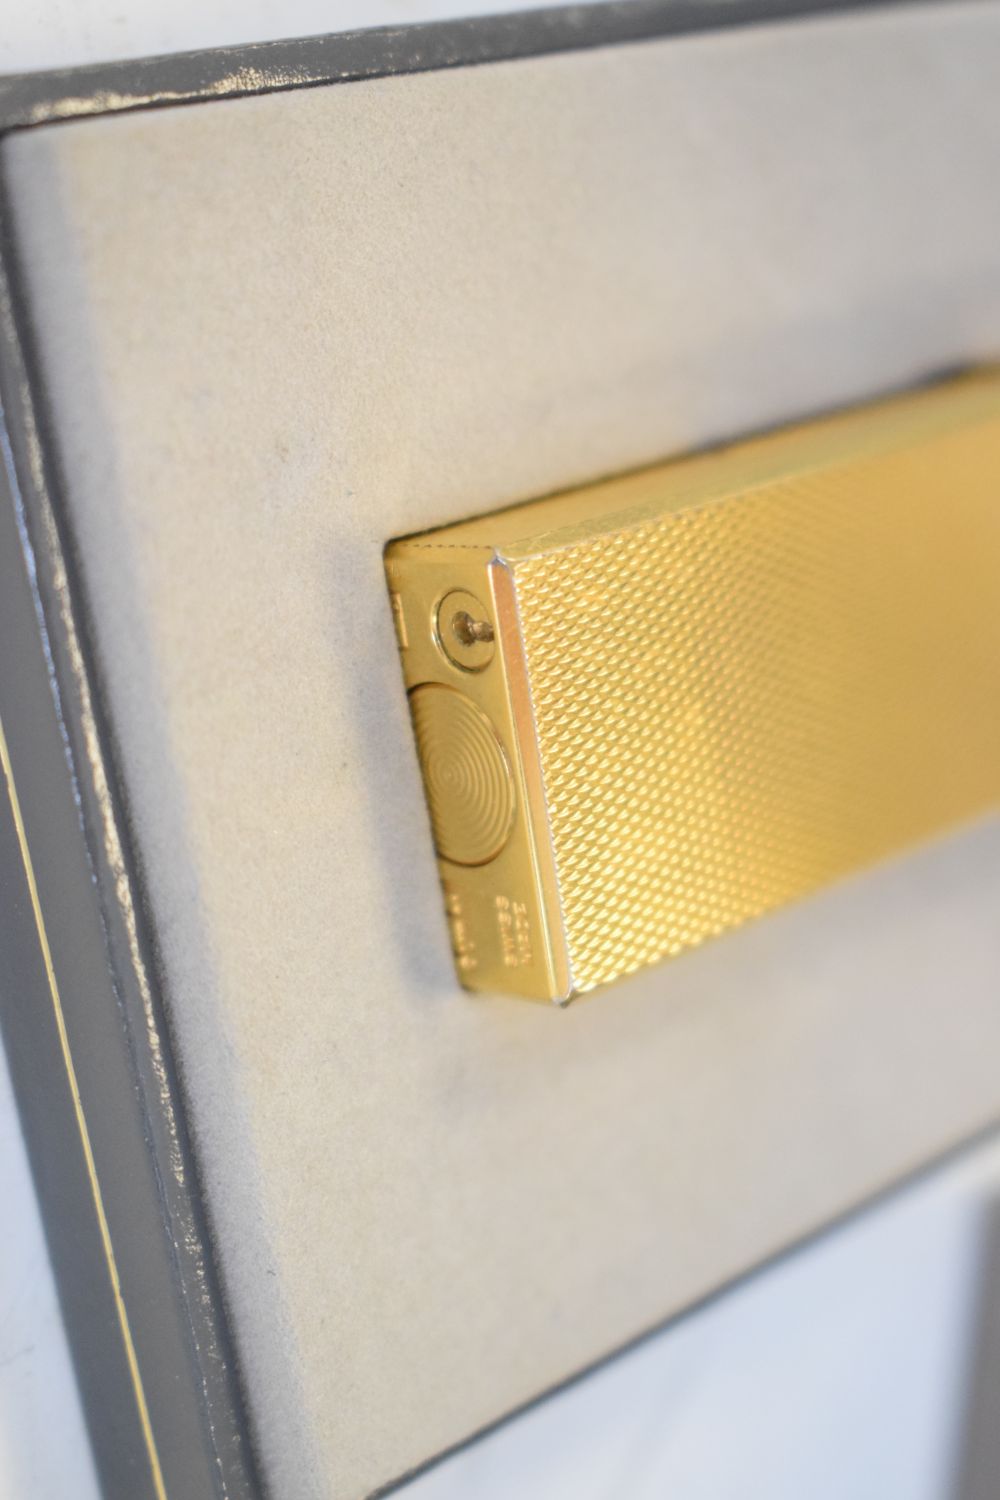 Dunhill - Gold-plated lighter, 6.5cm high, with original box and booklet - Image 2 of 4